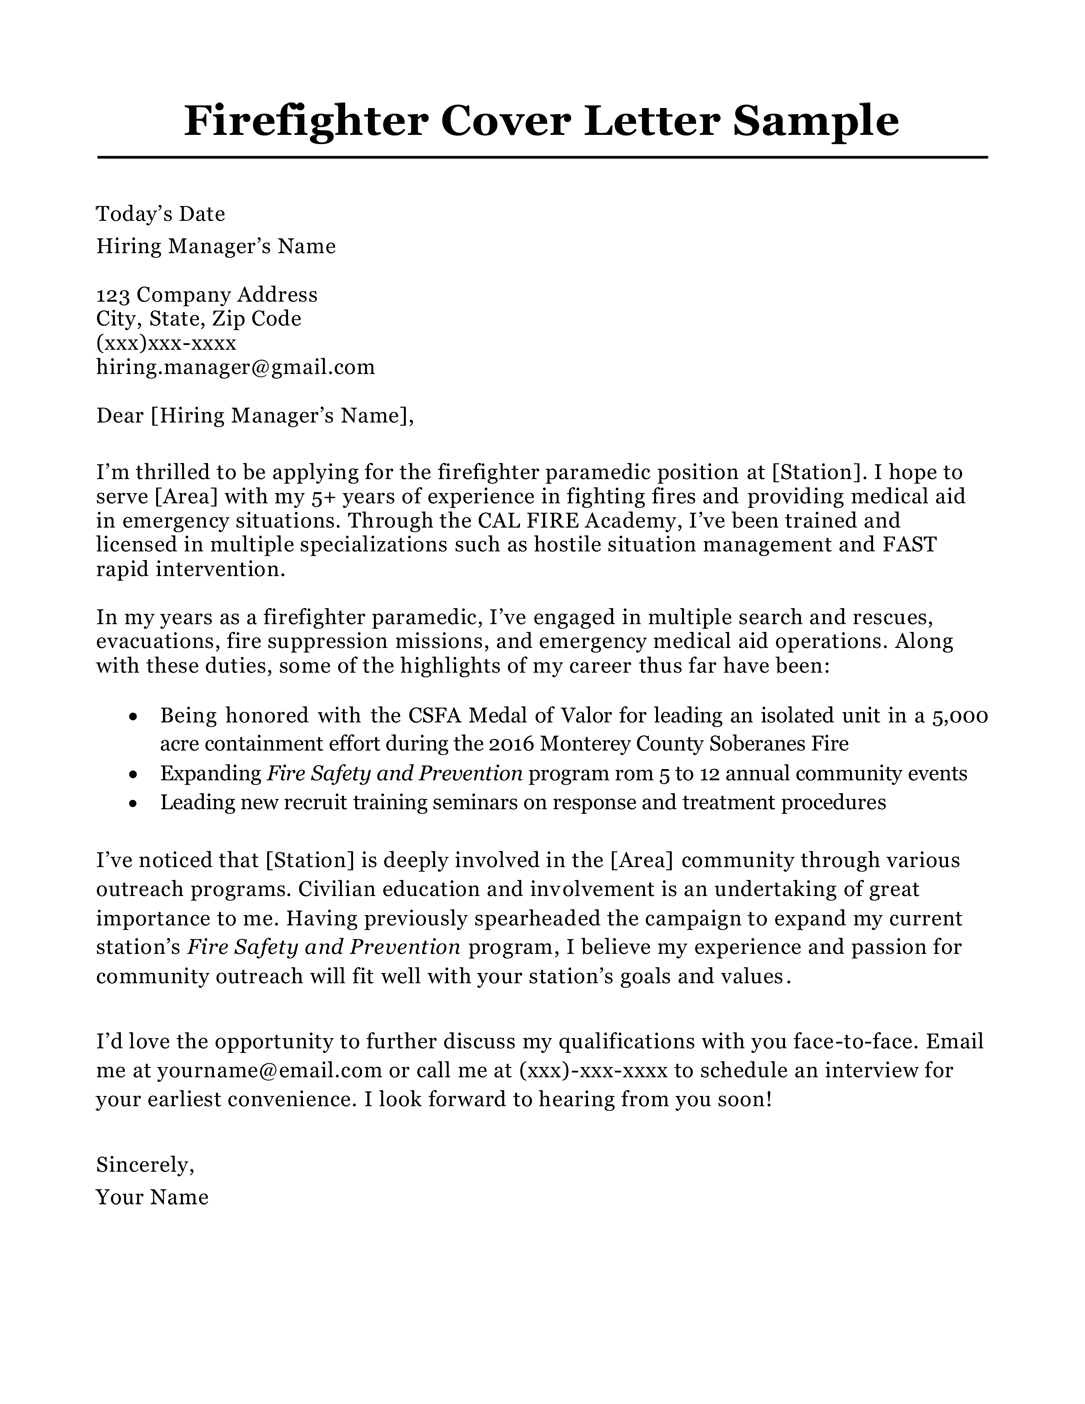 Same Cover Letter For Multiple Positions from resumecompanion.com